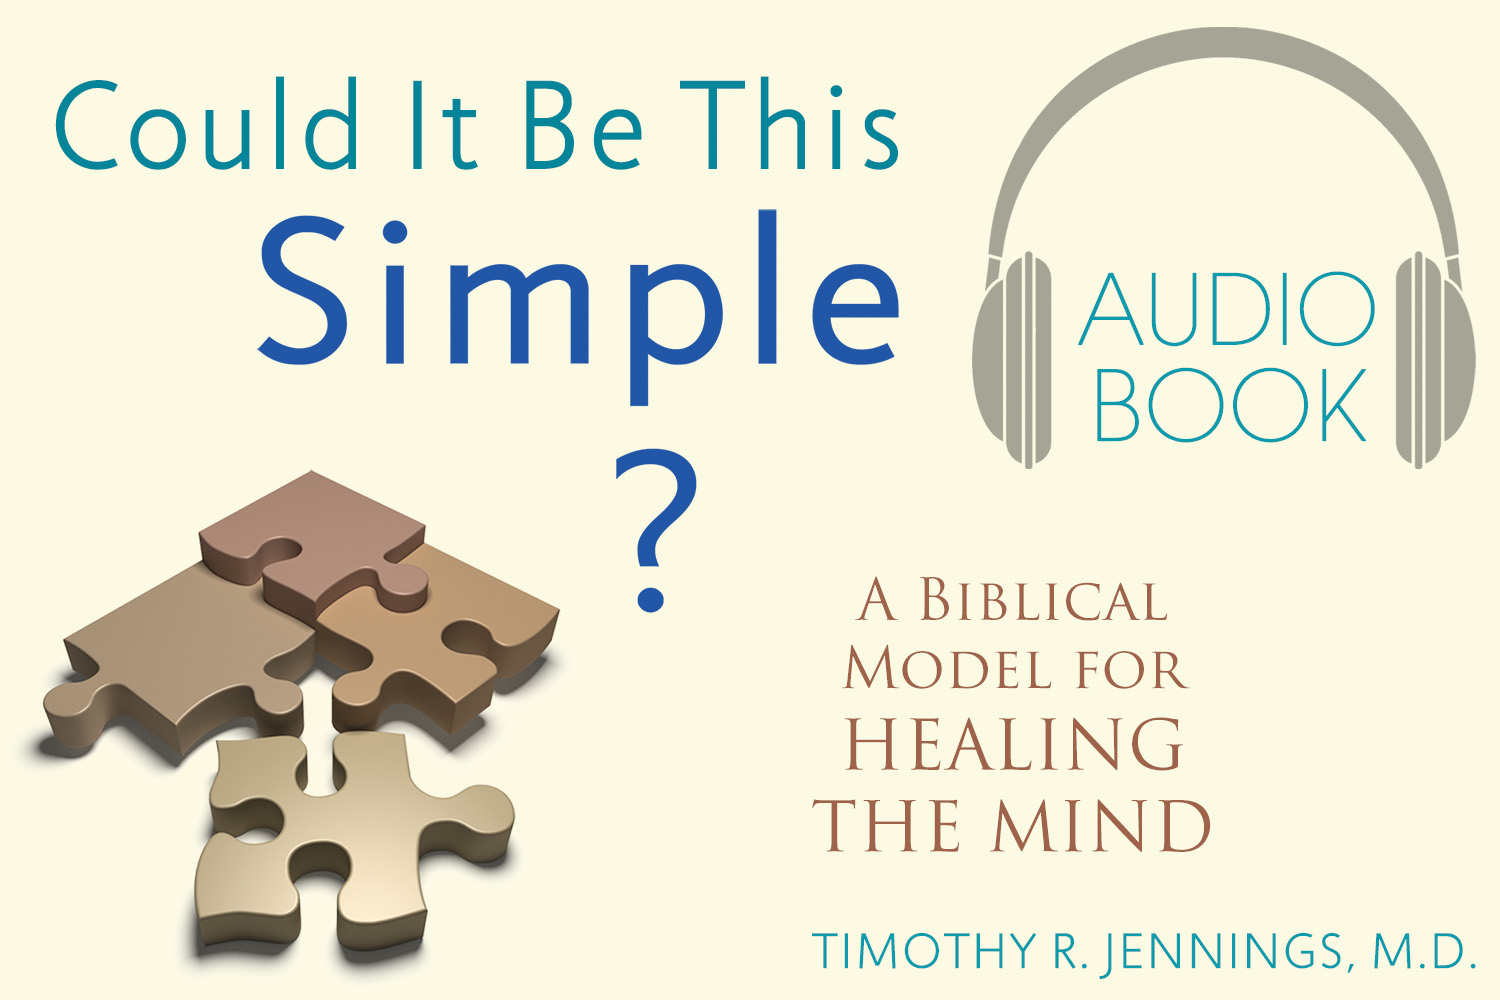 Could It Be This Simple? Audio Book